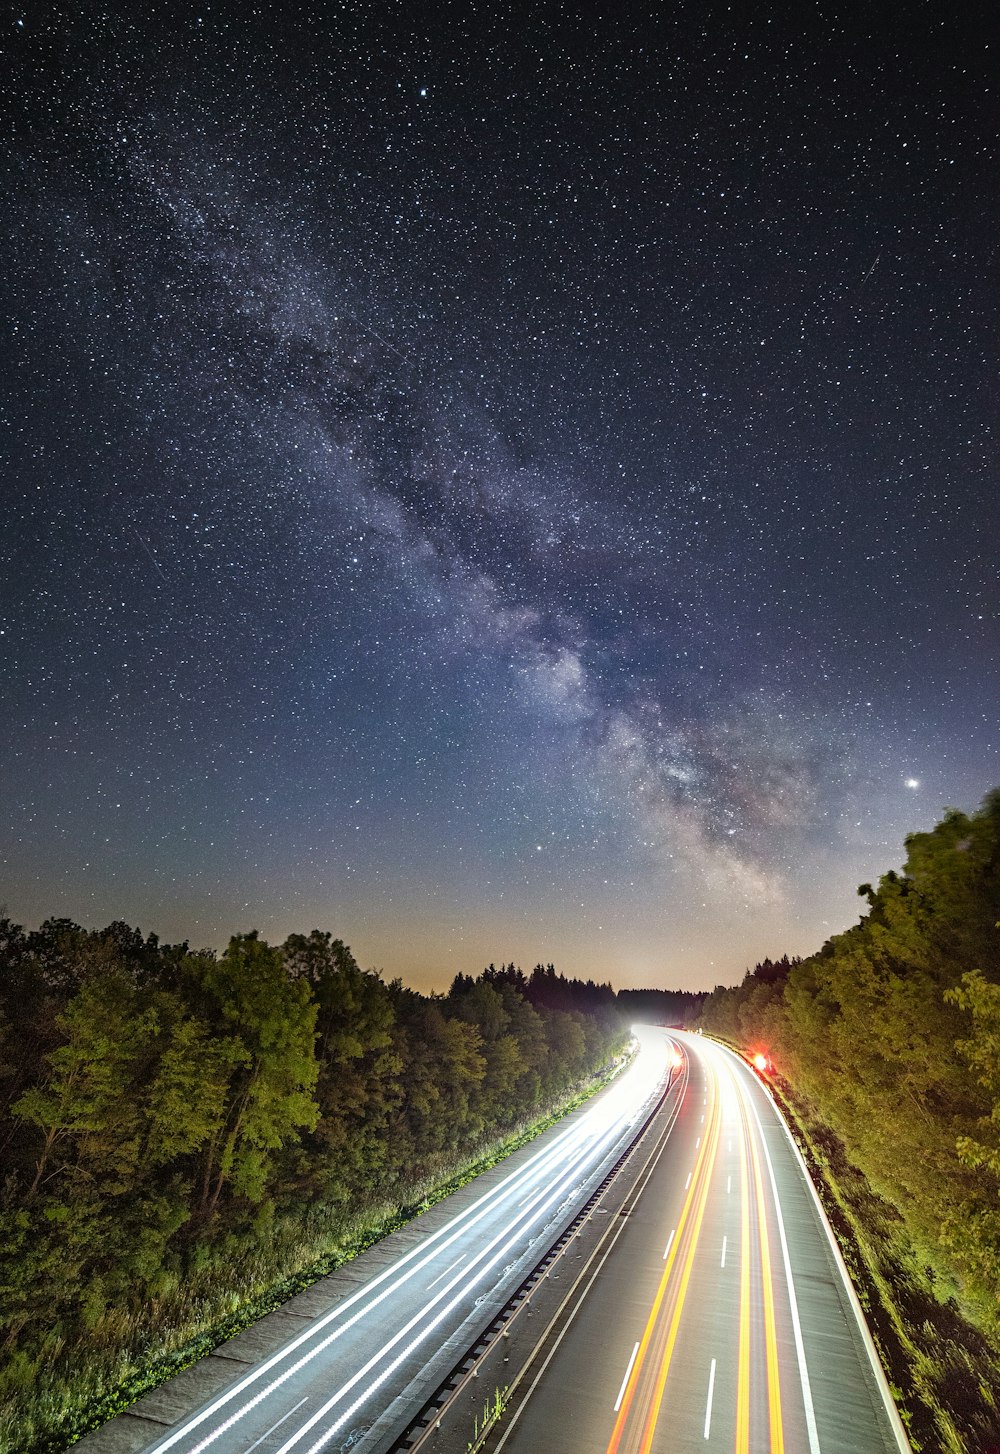 time lapsed photography of vehicles on road during nighttime